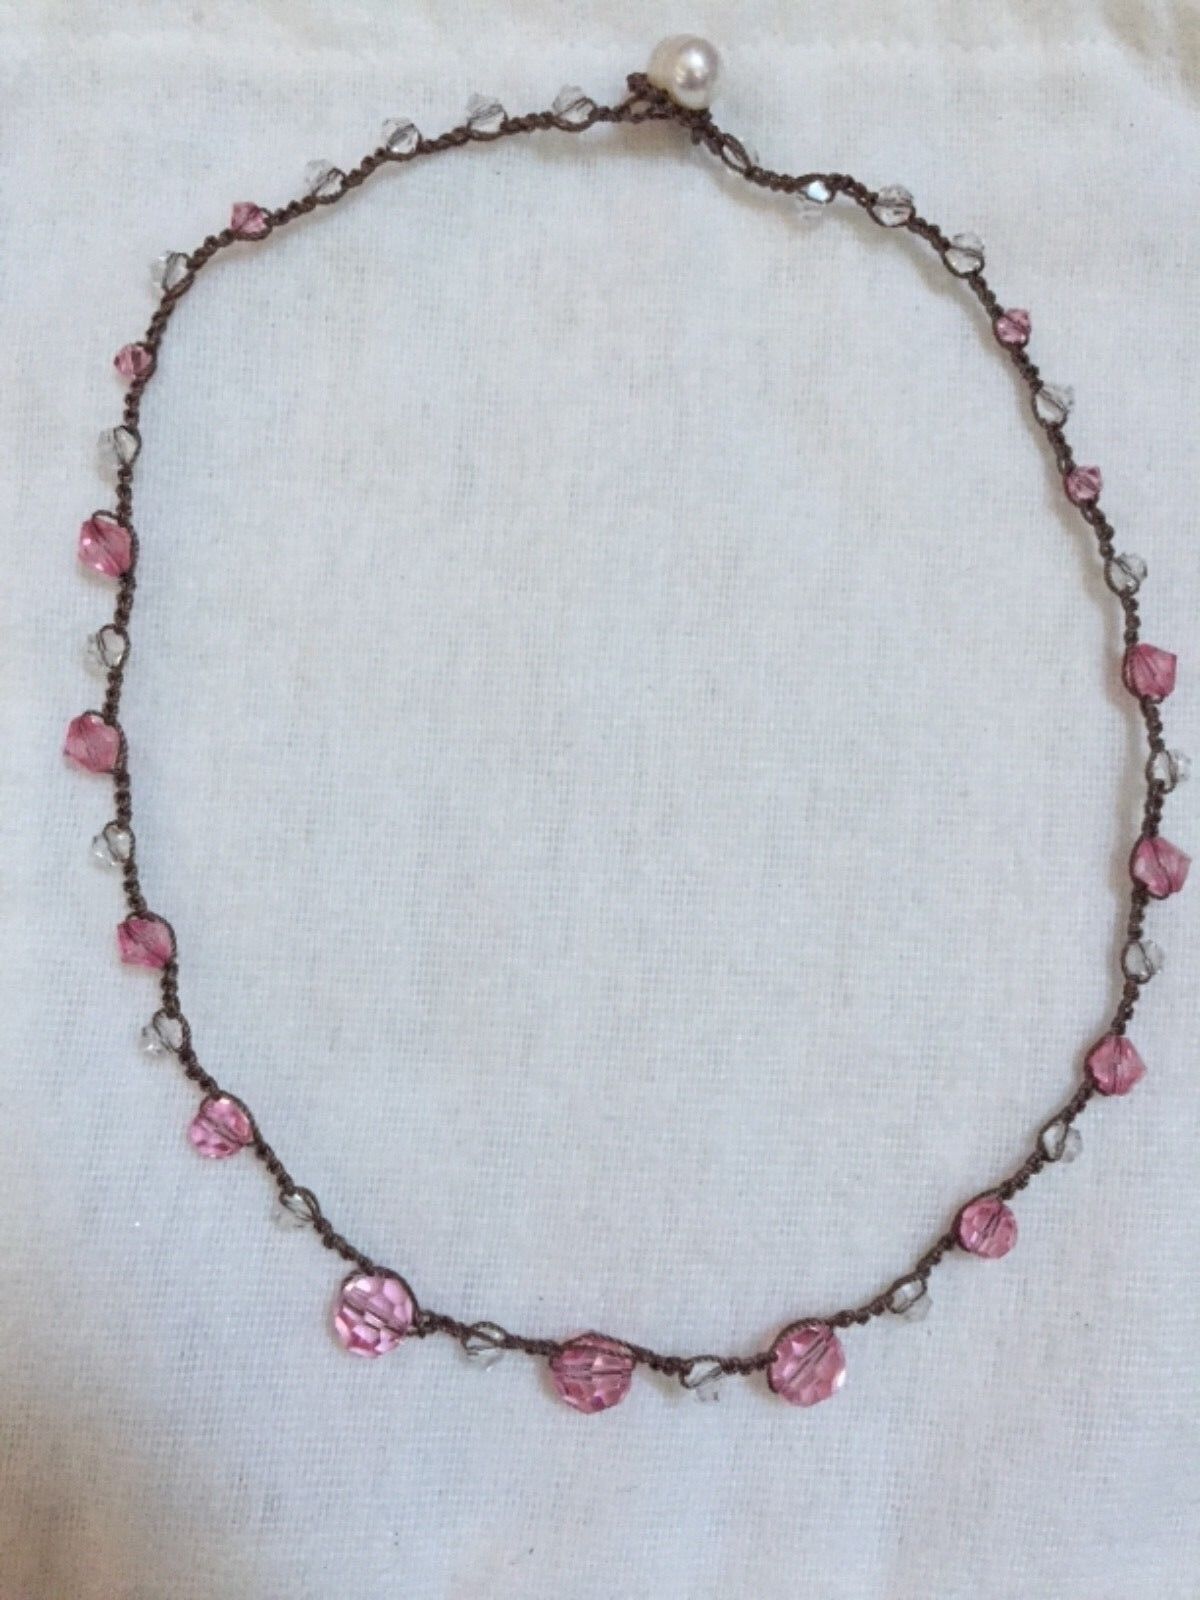 Handcrafted Crochet Pink Beaded Necklace